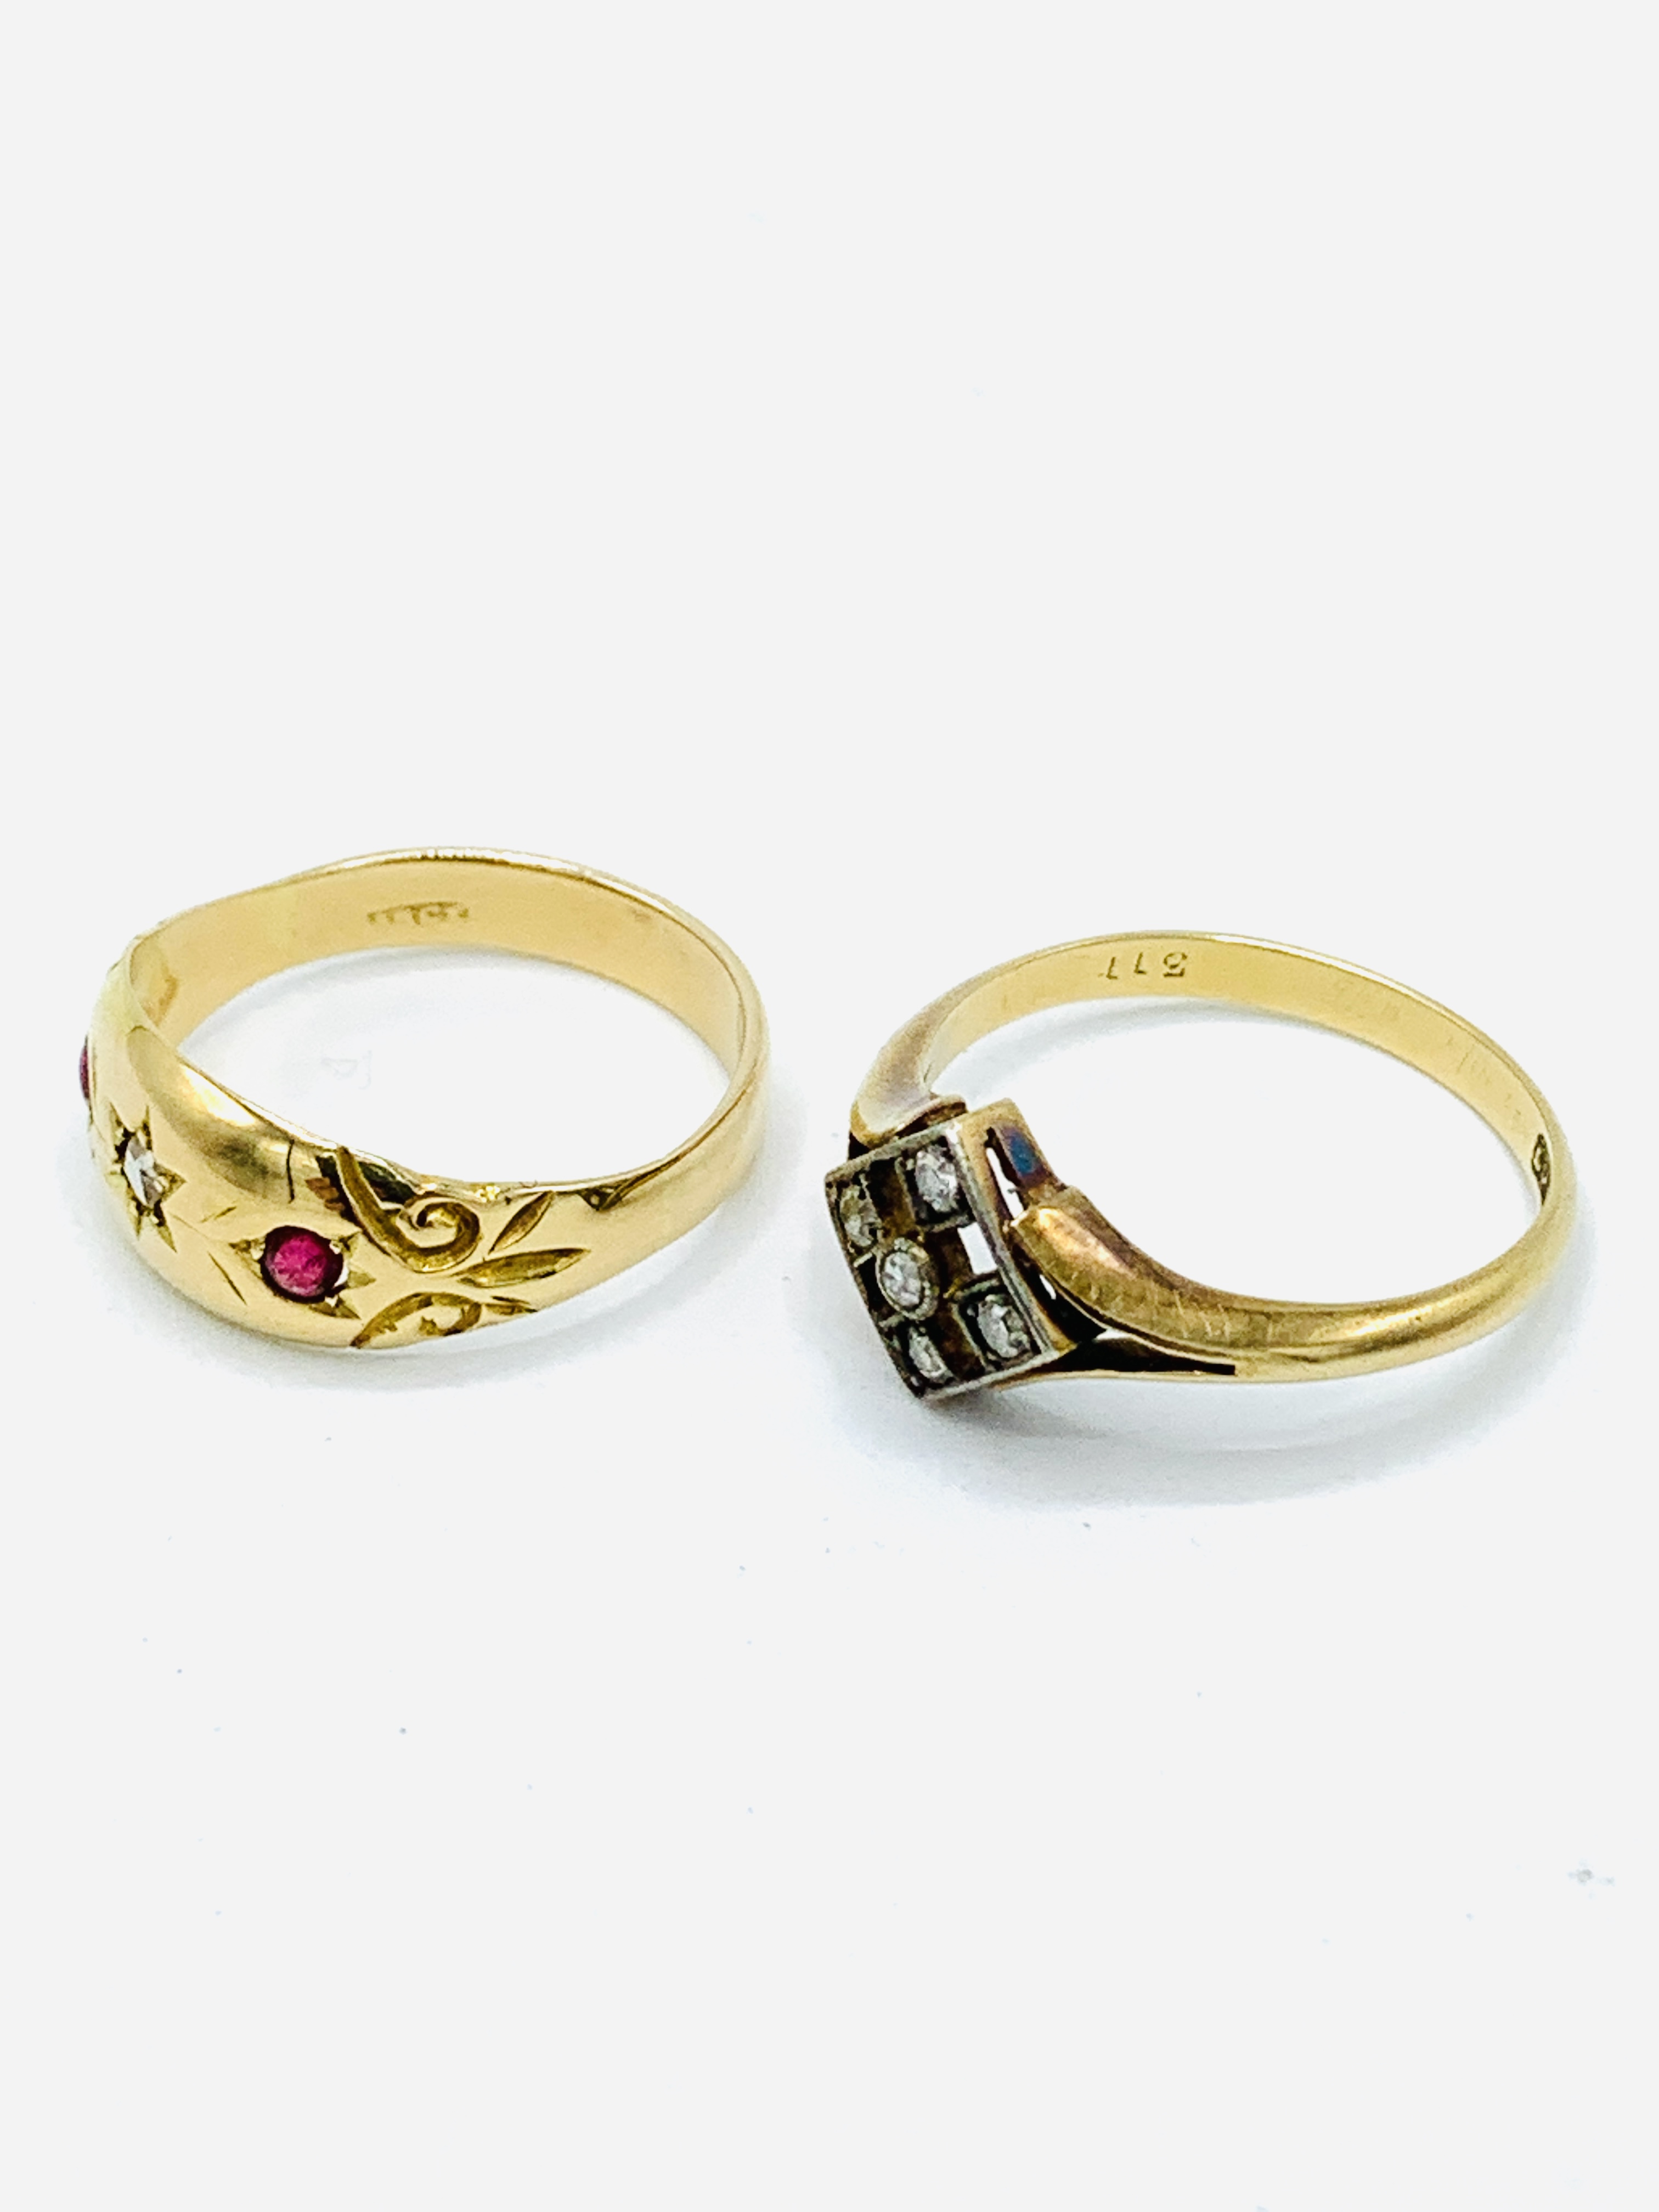 18ct gold ring set with 4 diamonds in a square, and an 18ct diamond and ruby set 'gypsy' ring - Image 3 of 5